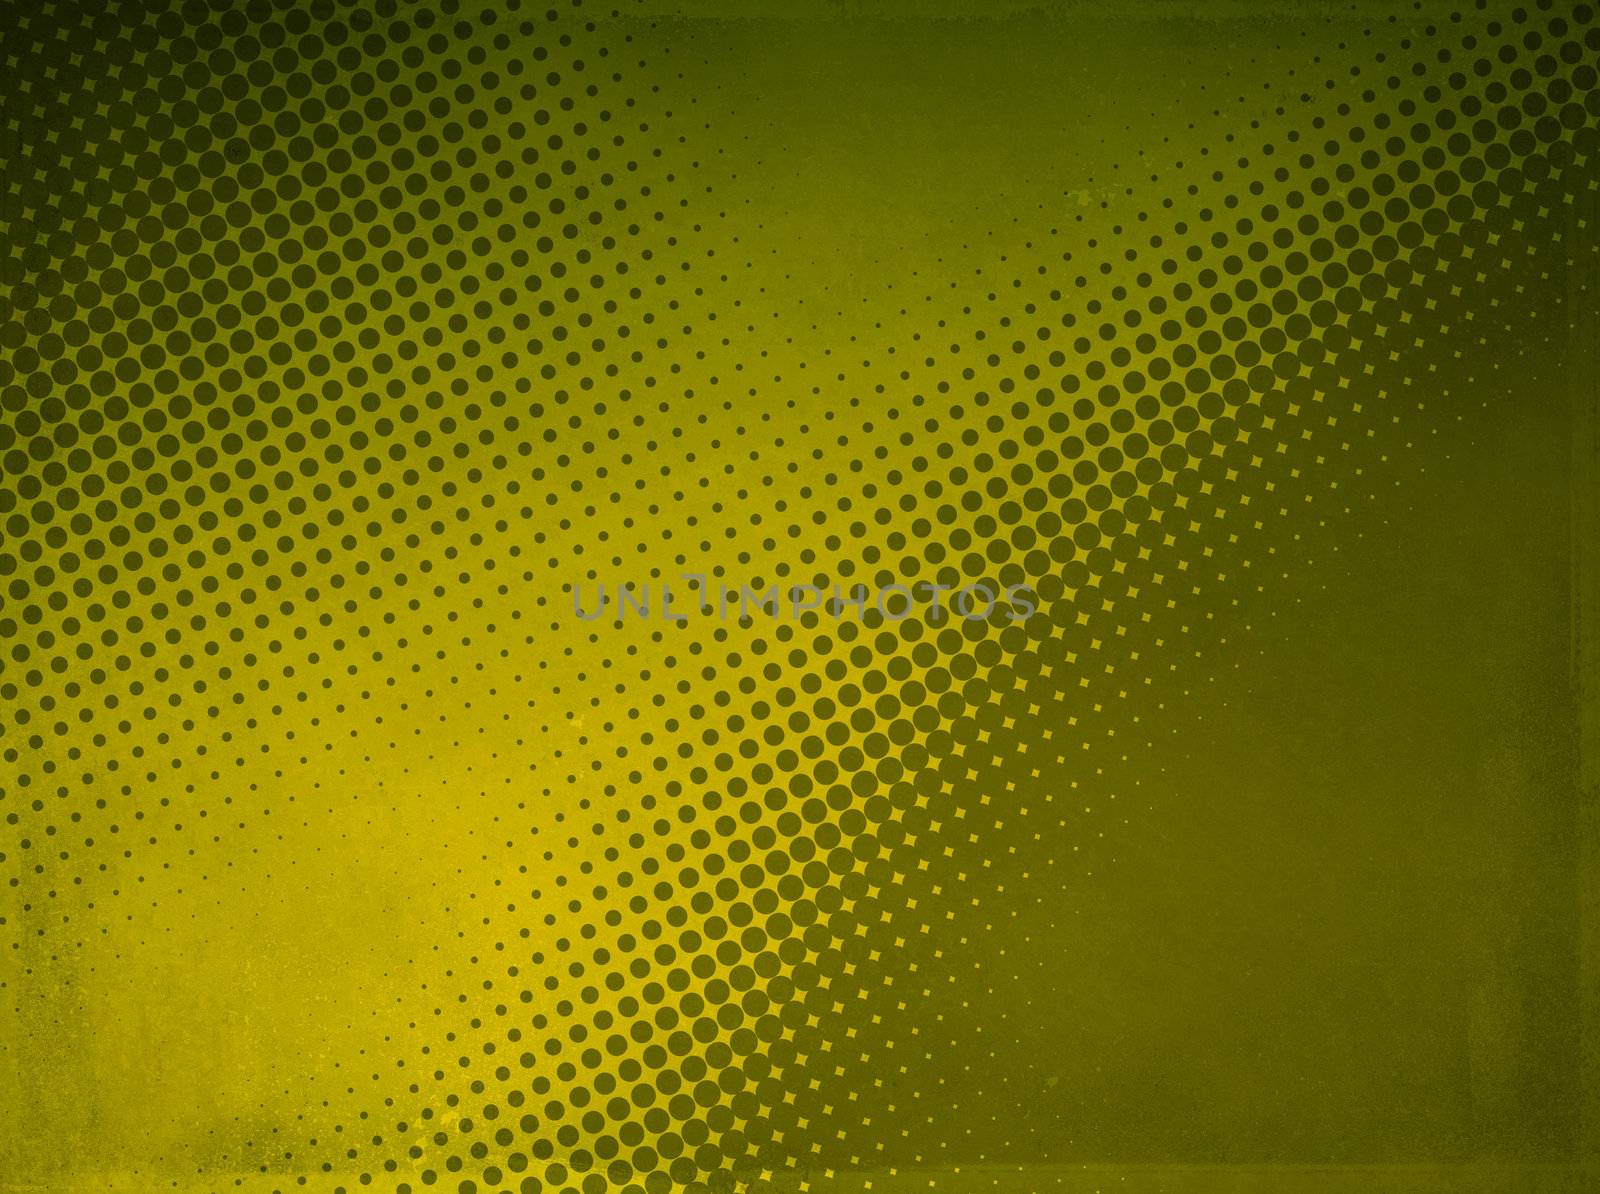 Grunge abstract halftone background made of a light and dark yellow dotted pattern.